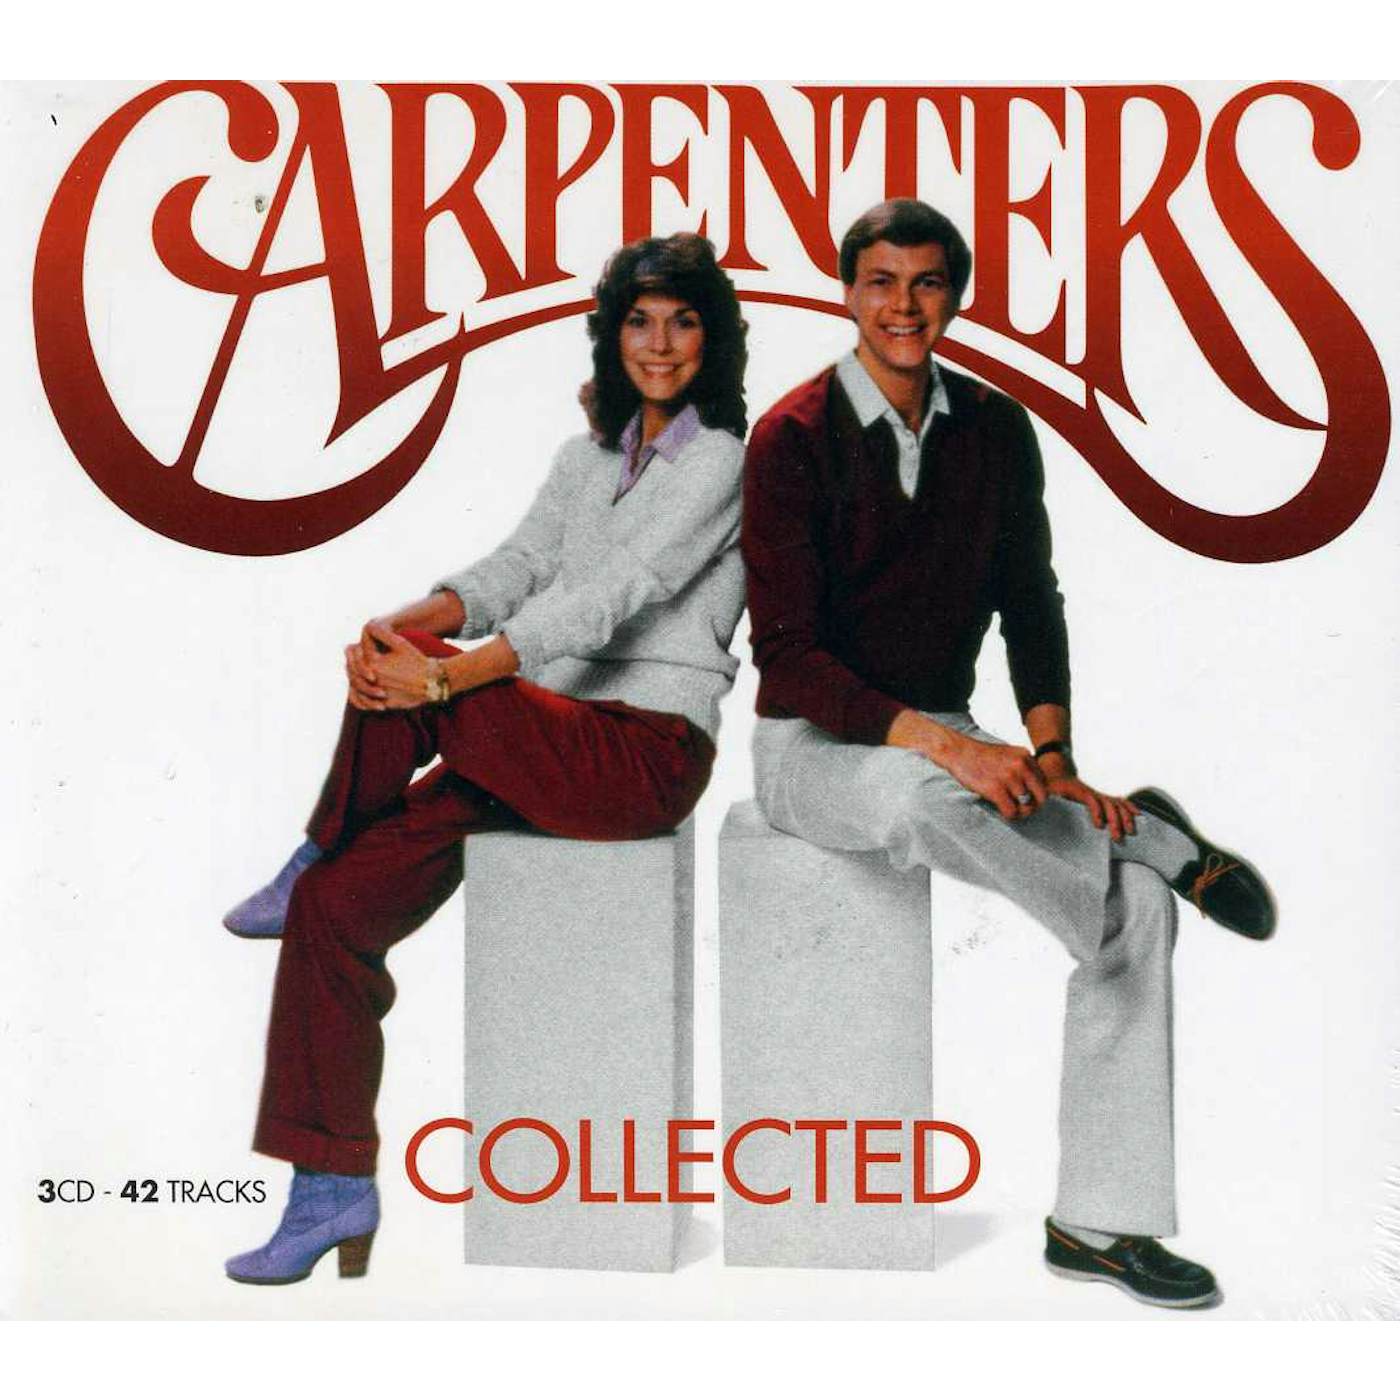 Carpenters COLLECTED (3CD) CD